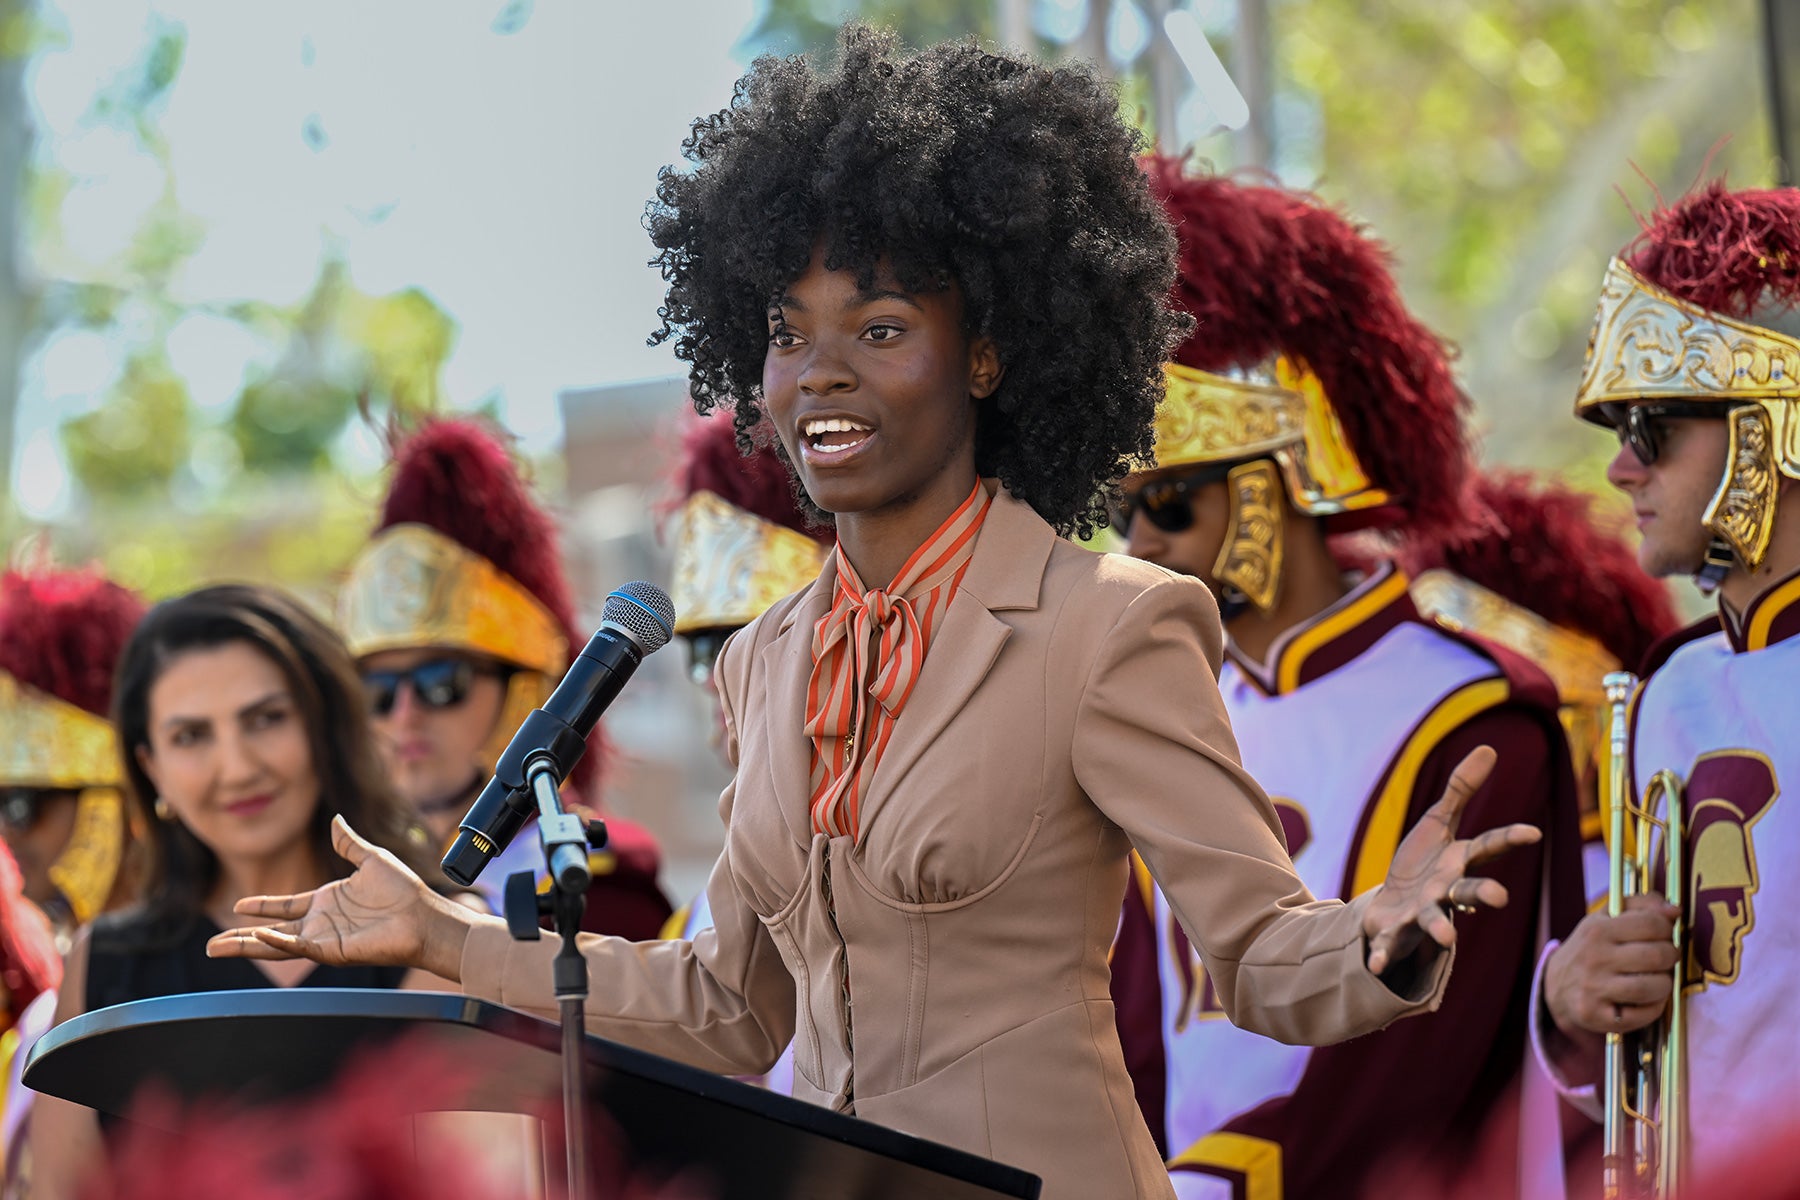 Los Angeles Times Festival of Books at USC: Nigerian American youth poet Salome Agbaroji